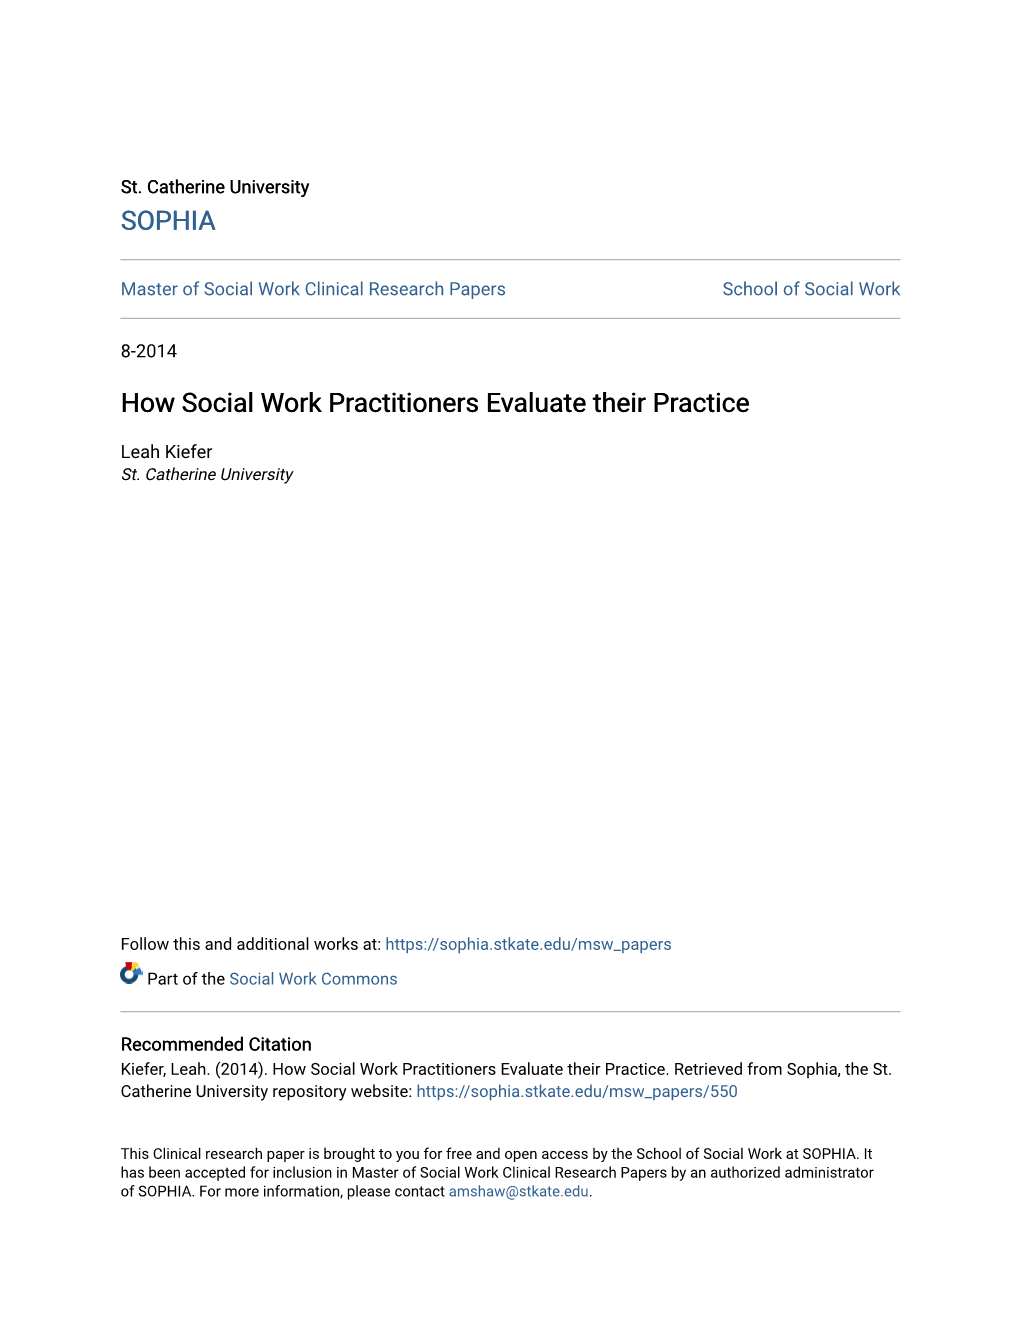 How Social Work Practitioners Evaluate Their Practice